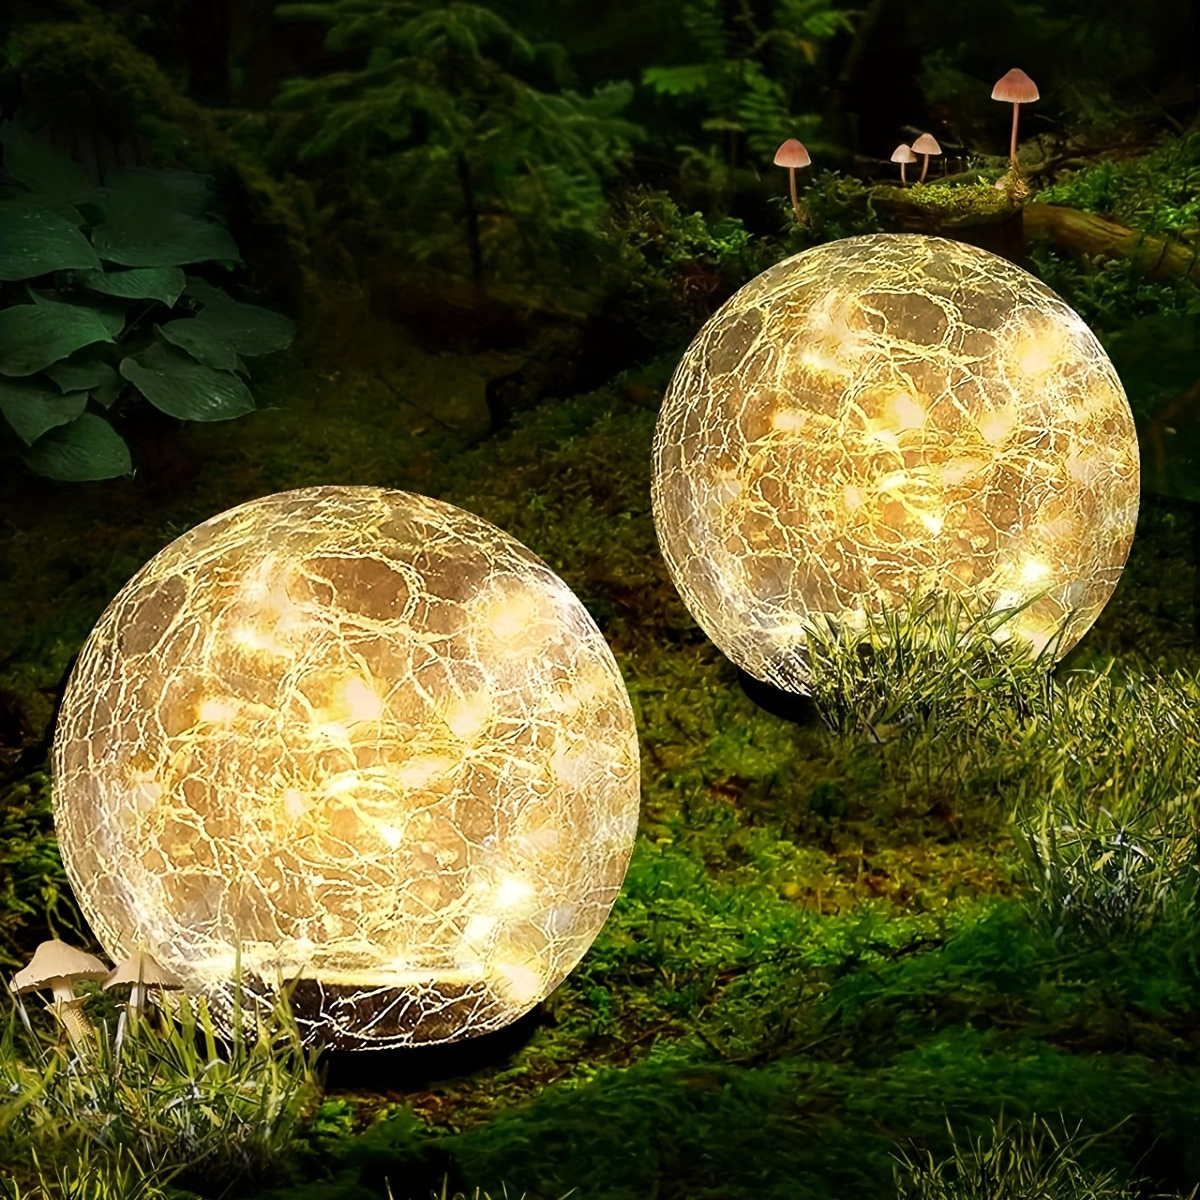 

energy-saving" Solar-powered Garden Lights - Warm White Led, Cracked Glass Ball Design For Outdoor Decor, Pathway, Patio & Yard - Available In 3.9", 4.7", 5.9" Sizes